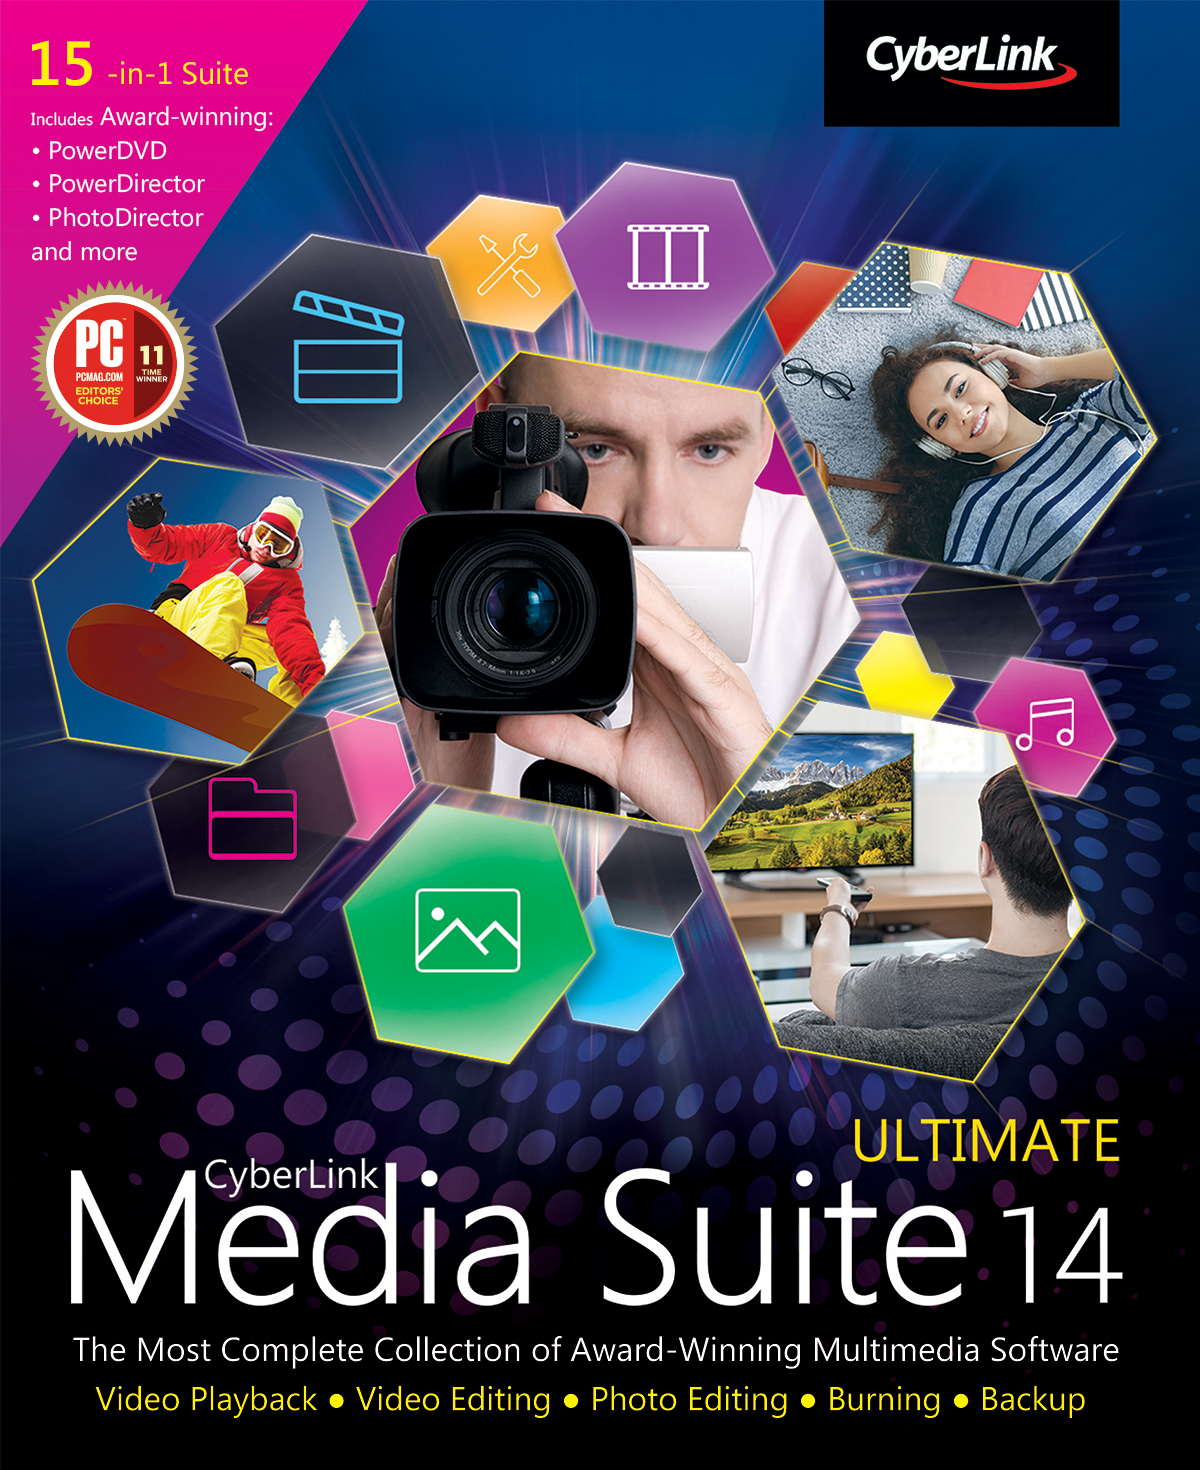  cyberlink media suite free download for windows 10 /11